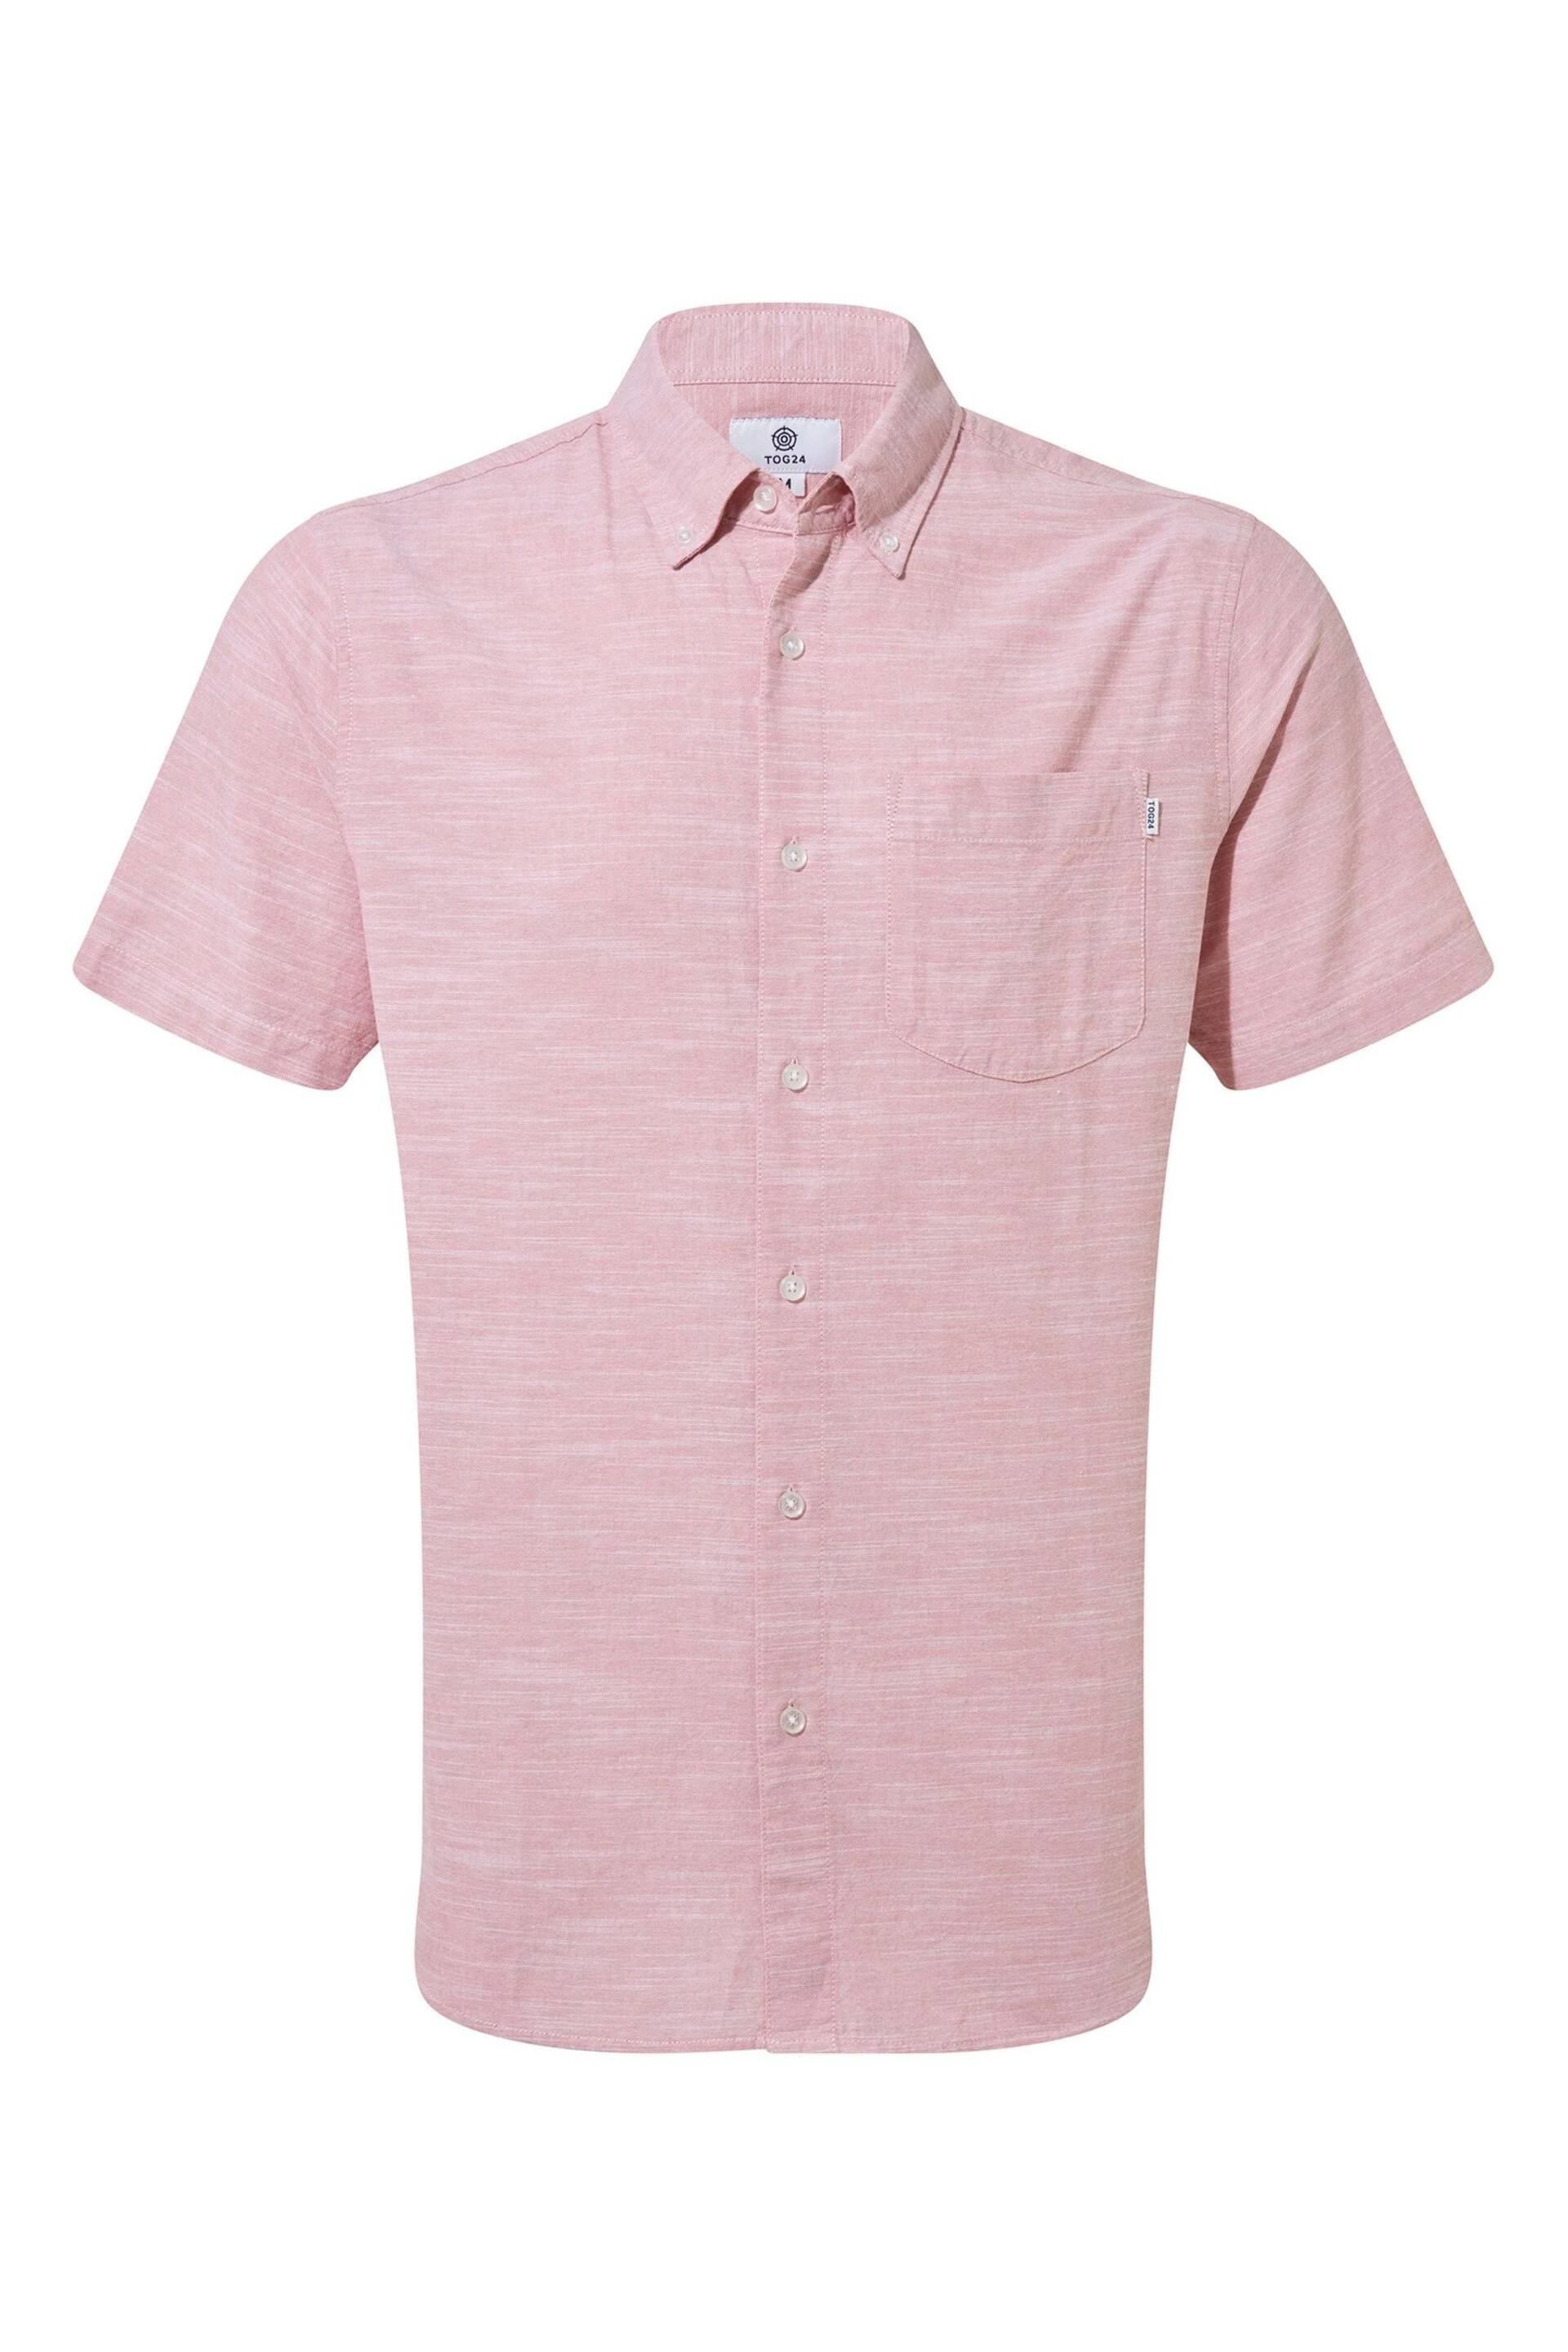 Tog 24 Washed Red Dwaine Short Sleeve Shirt - Image 8 of 8